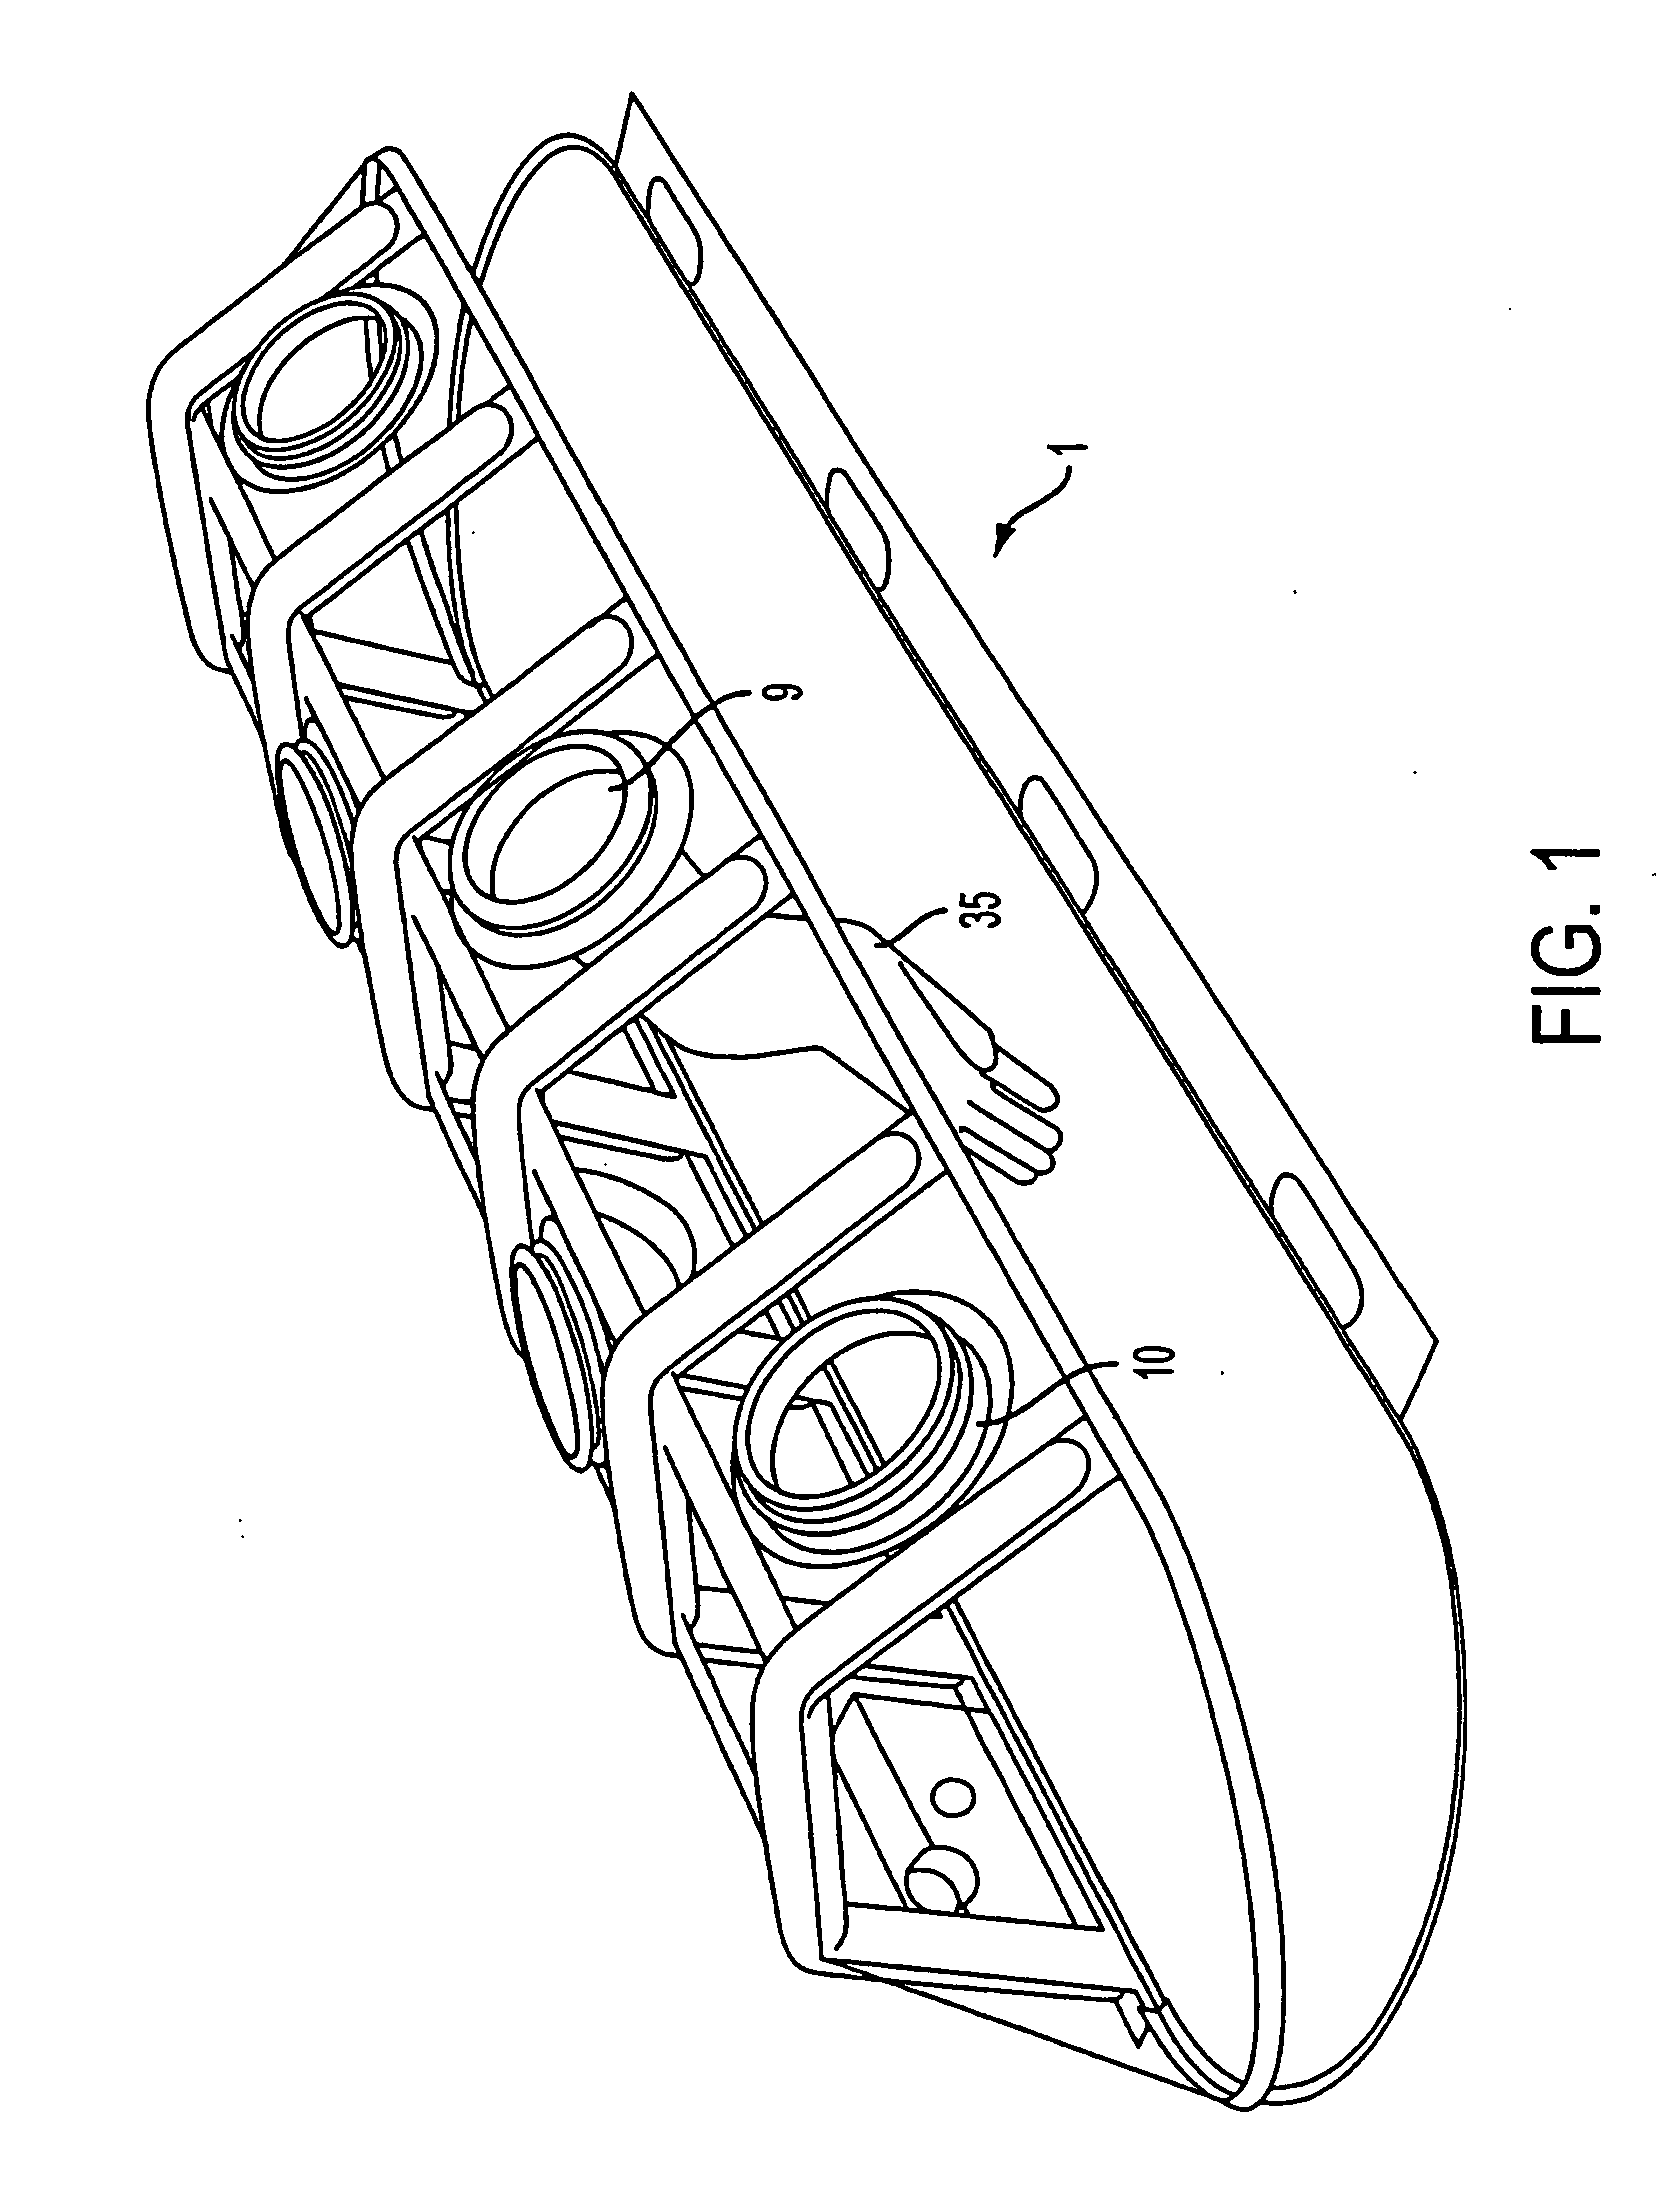 Modular port system and replacement method thereof